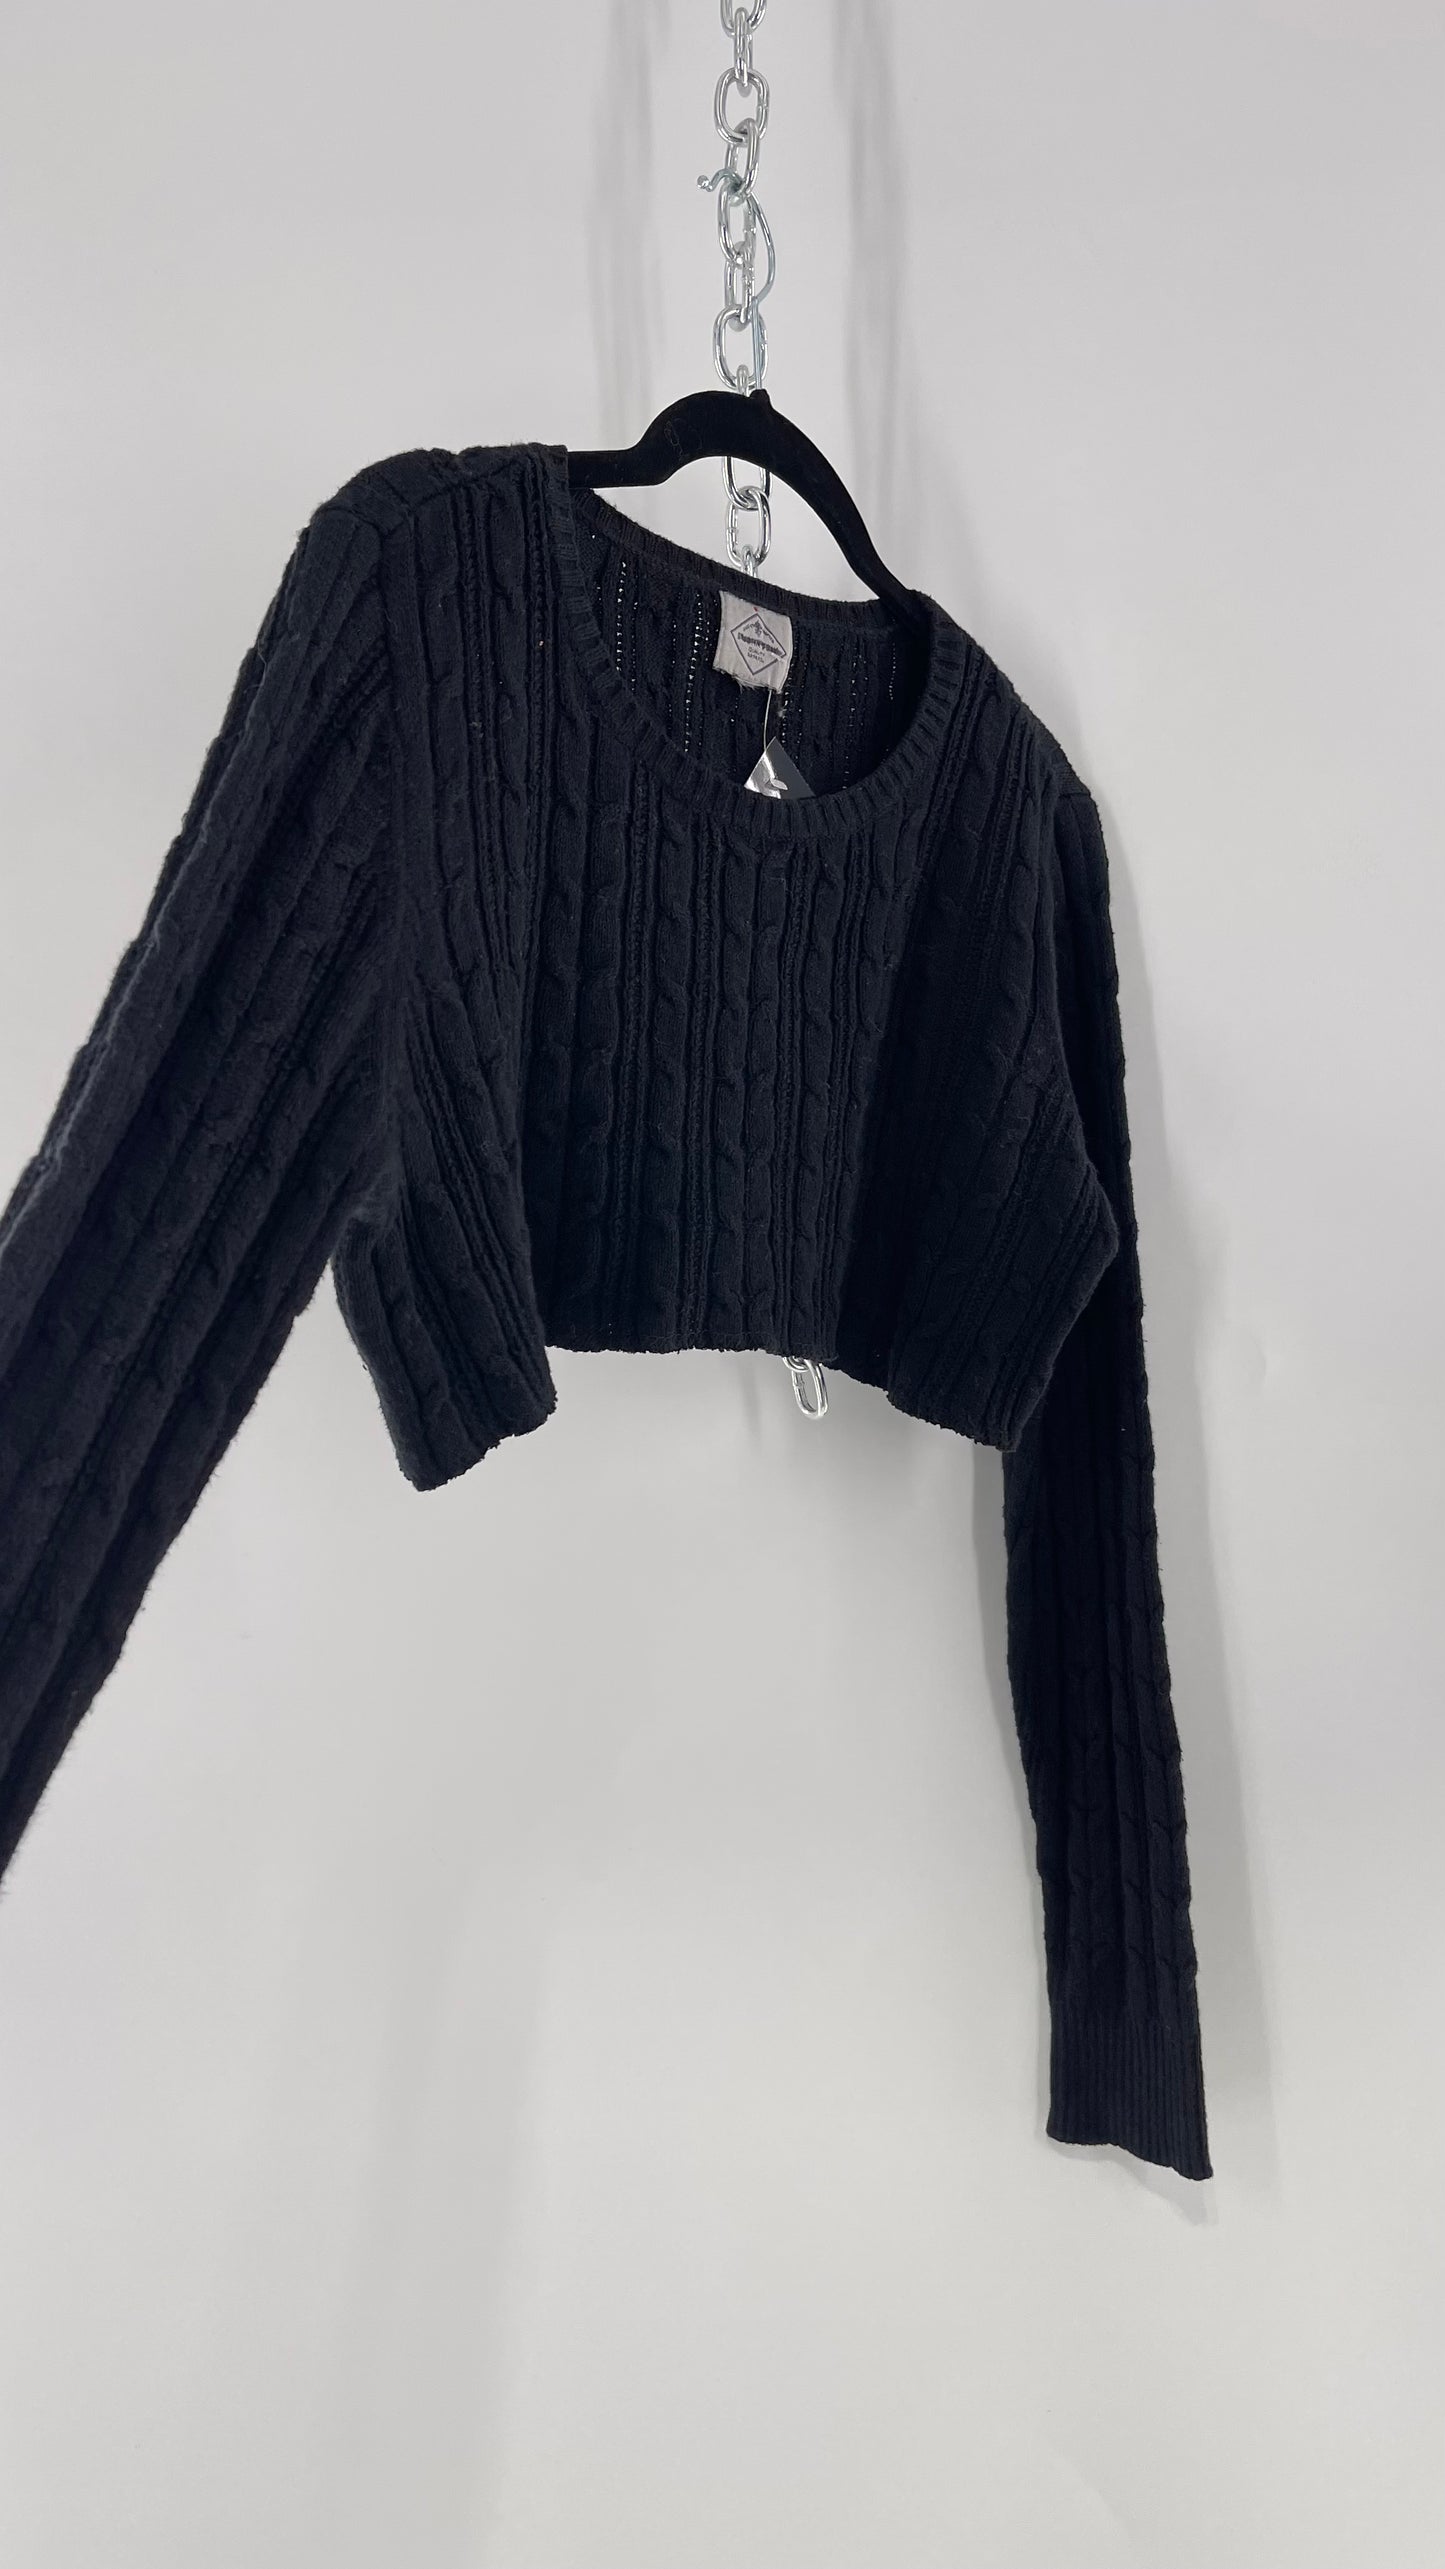 Urban Outfitters Reworked Cropped Cableknit Black Sweater (Medium)